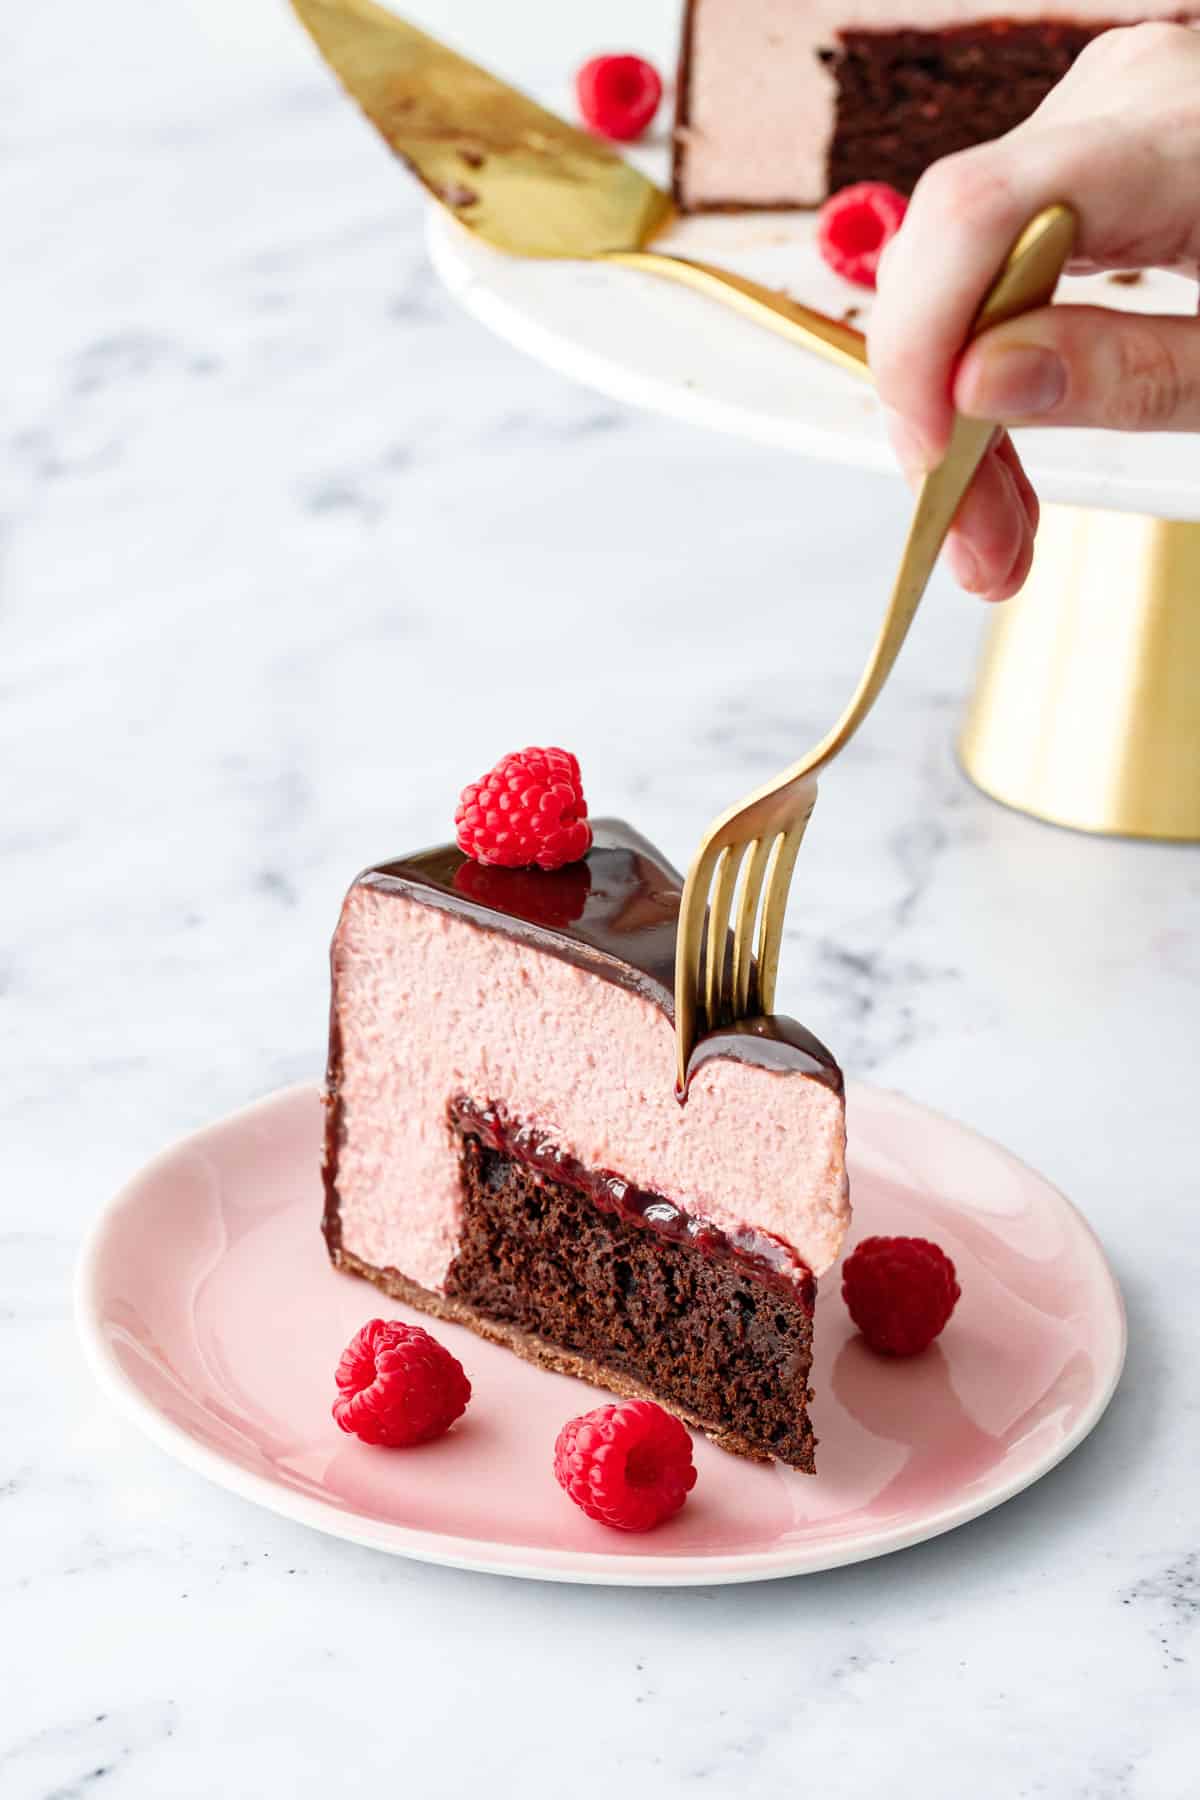 Slice of Chocolate Raspberry Mousse Cake with a gold fork cutting off a bite, gold and marble cake stand in the background.